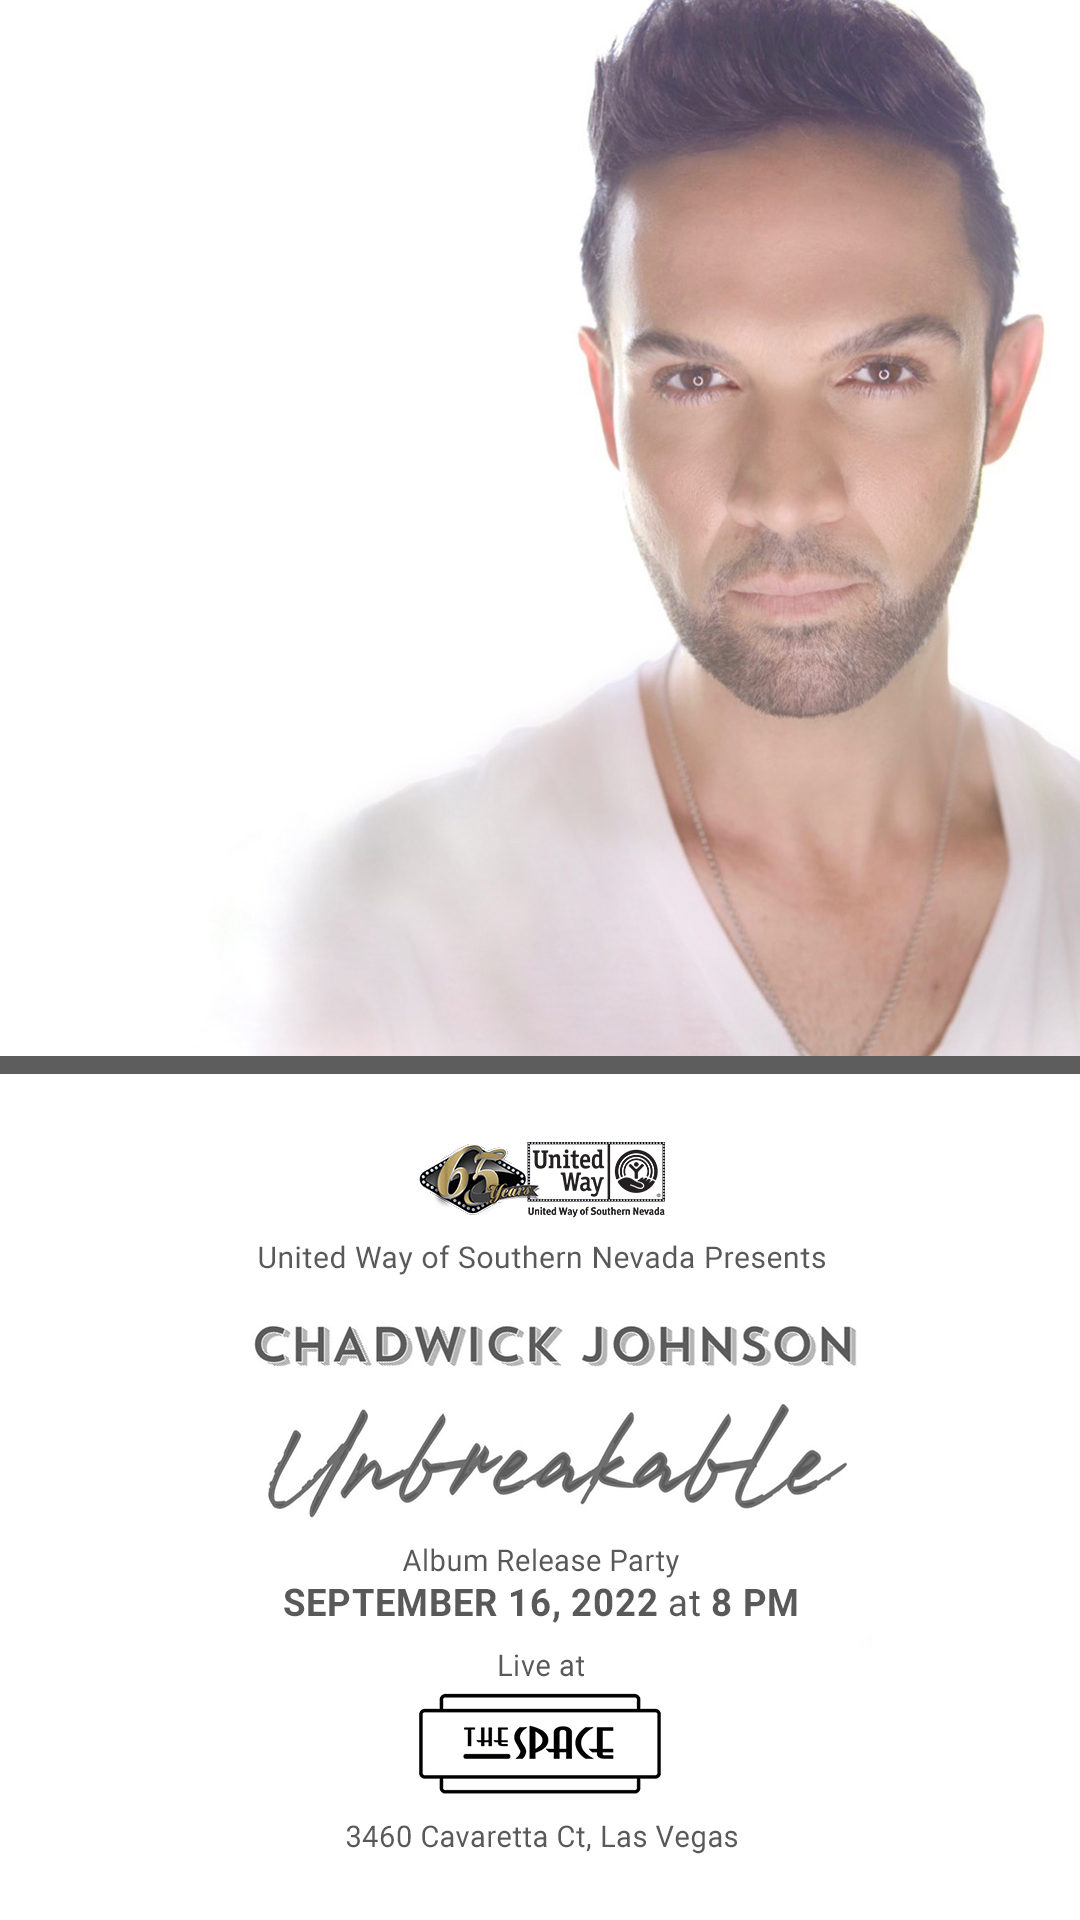 United Way of Southern Nevada Presents Chadwick Johnson Album Release Show